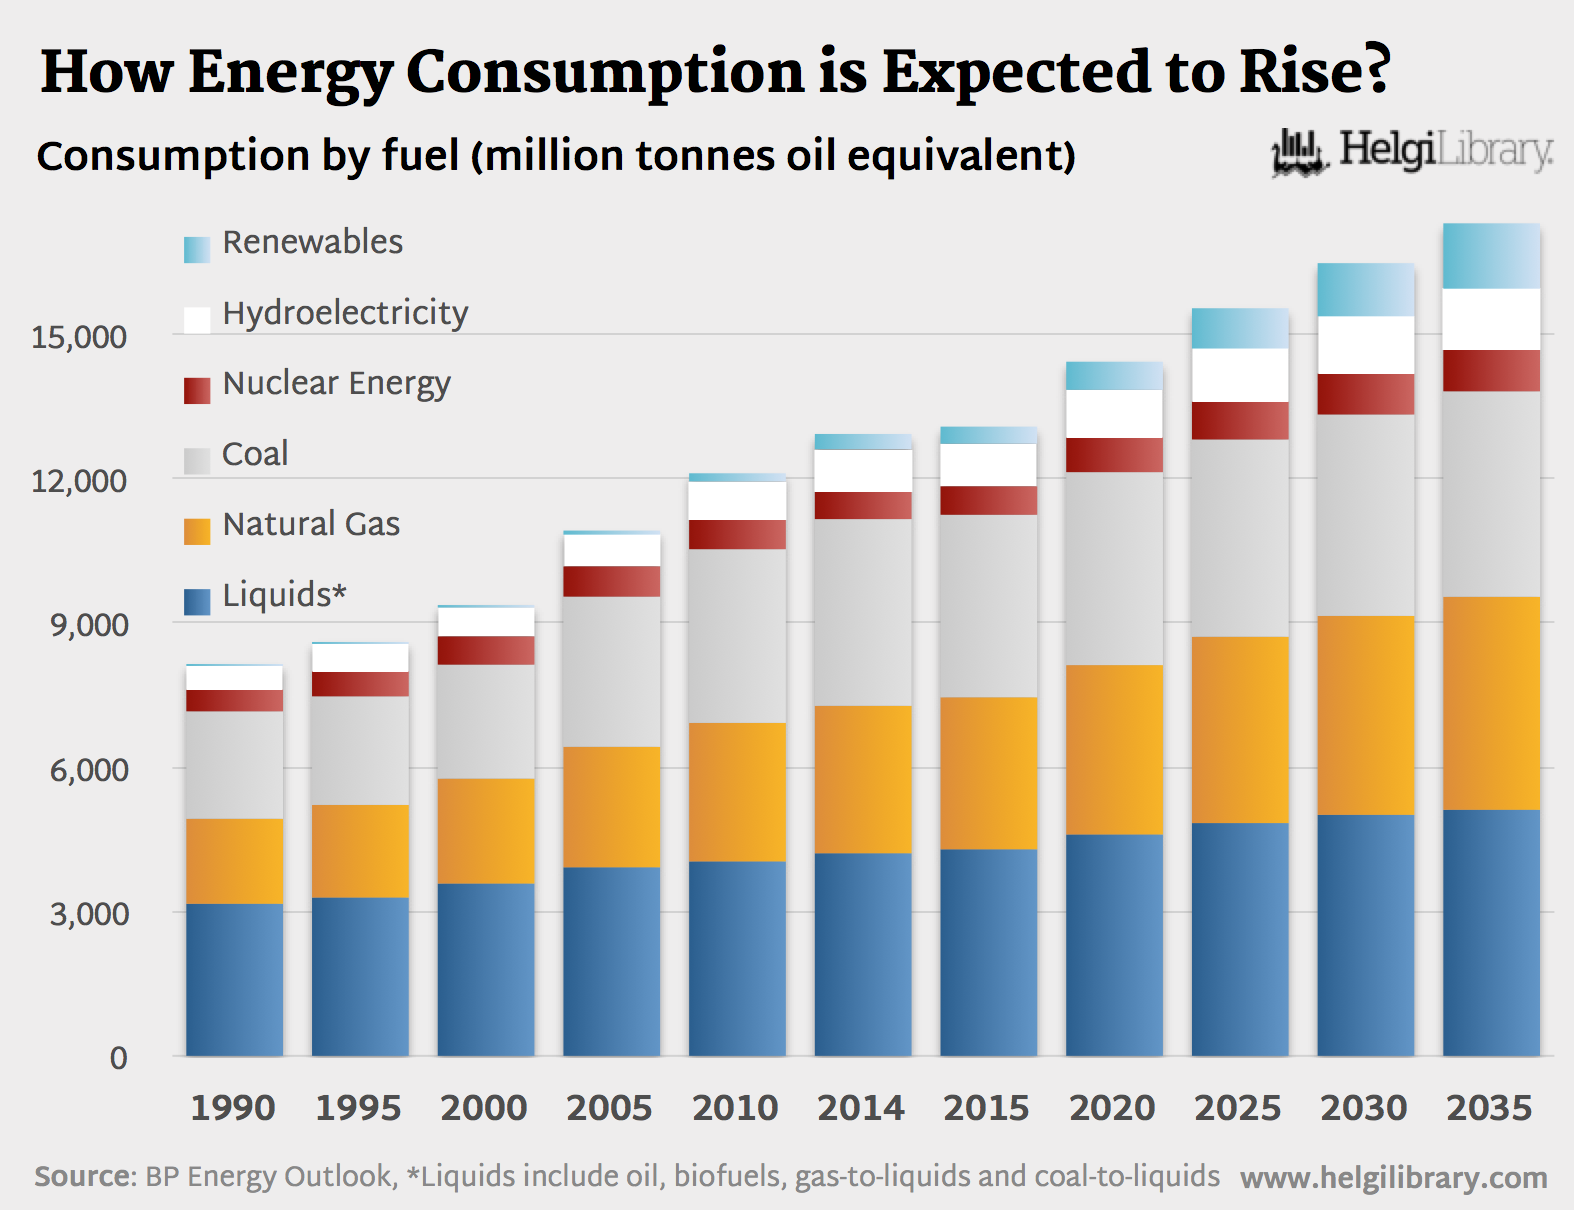 How Energy Consumption is Expected to Rise by 2035?